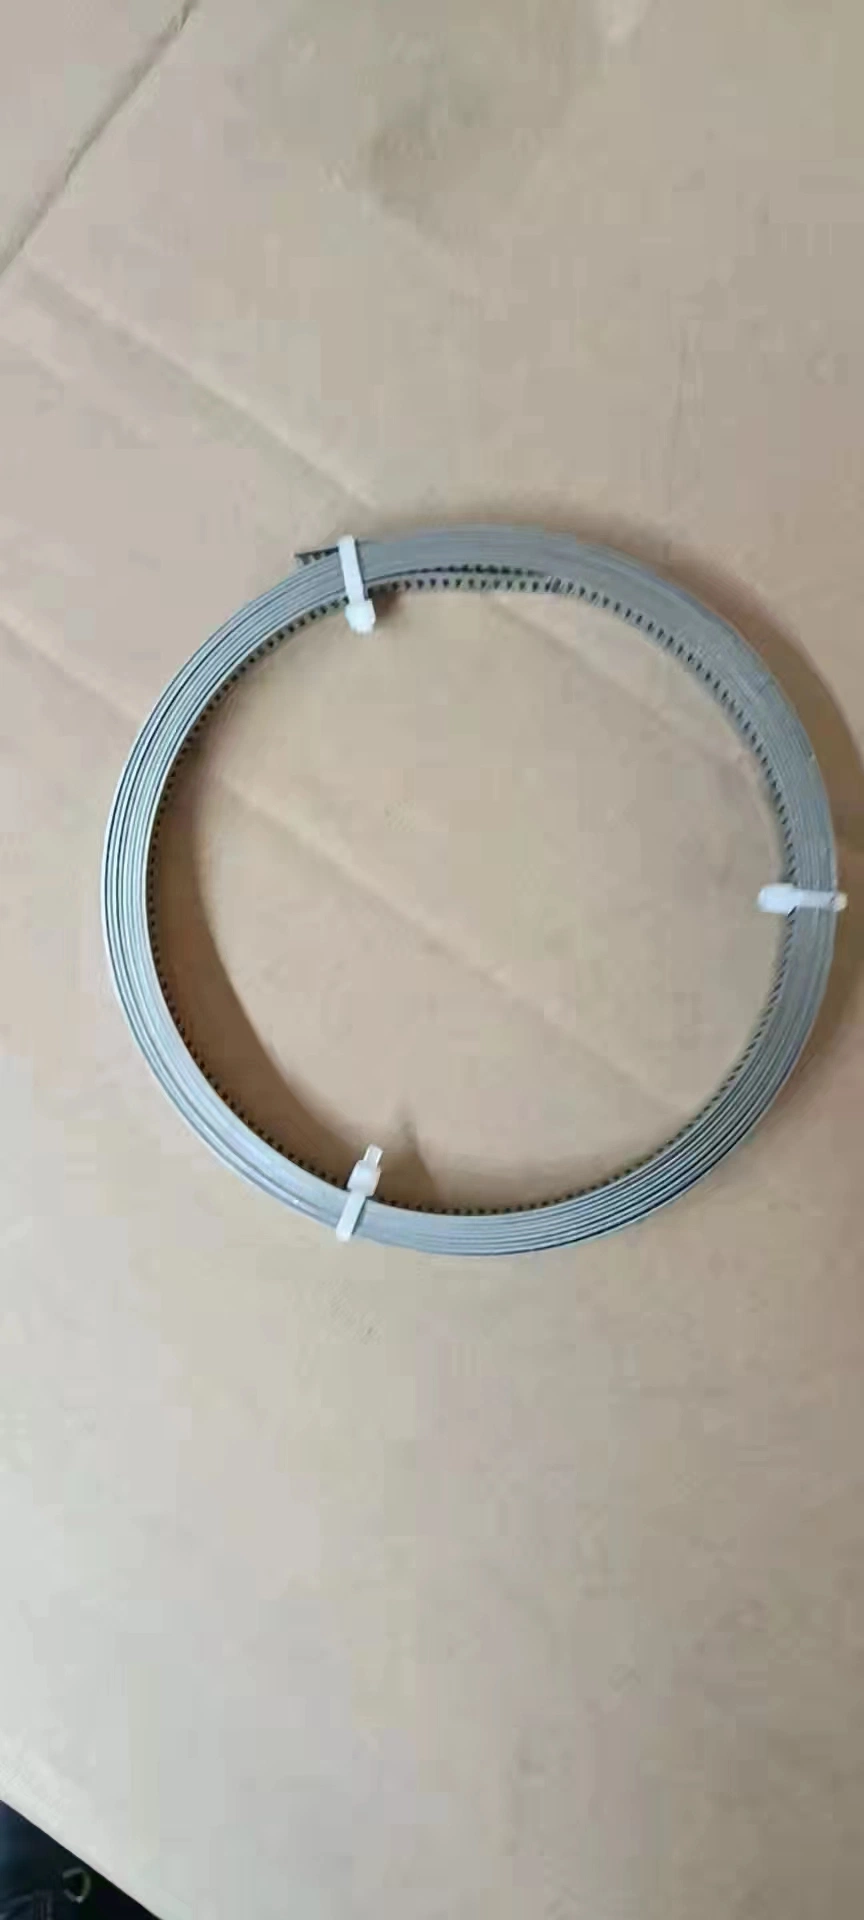 W4 Constant Tension Spring Band Hose Clamp